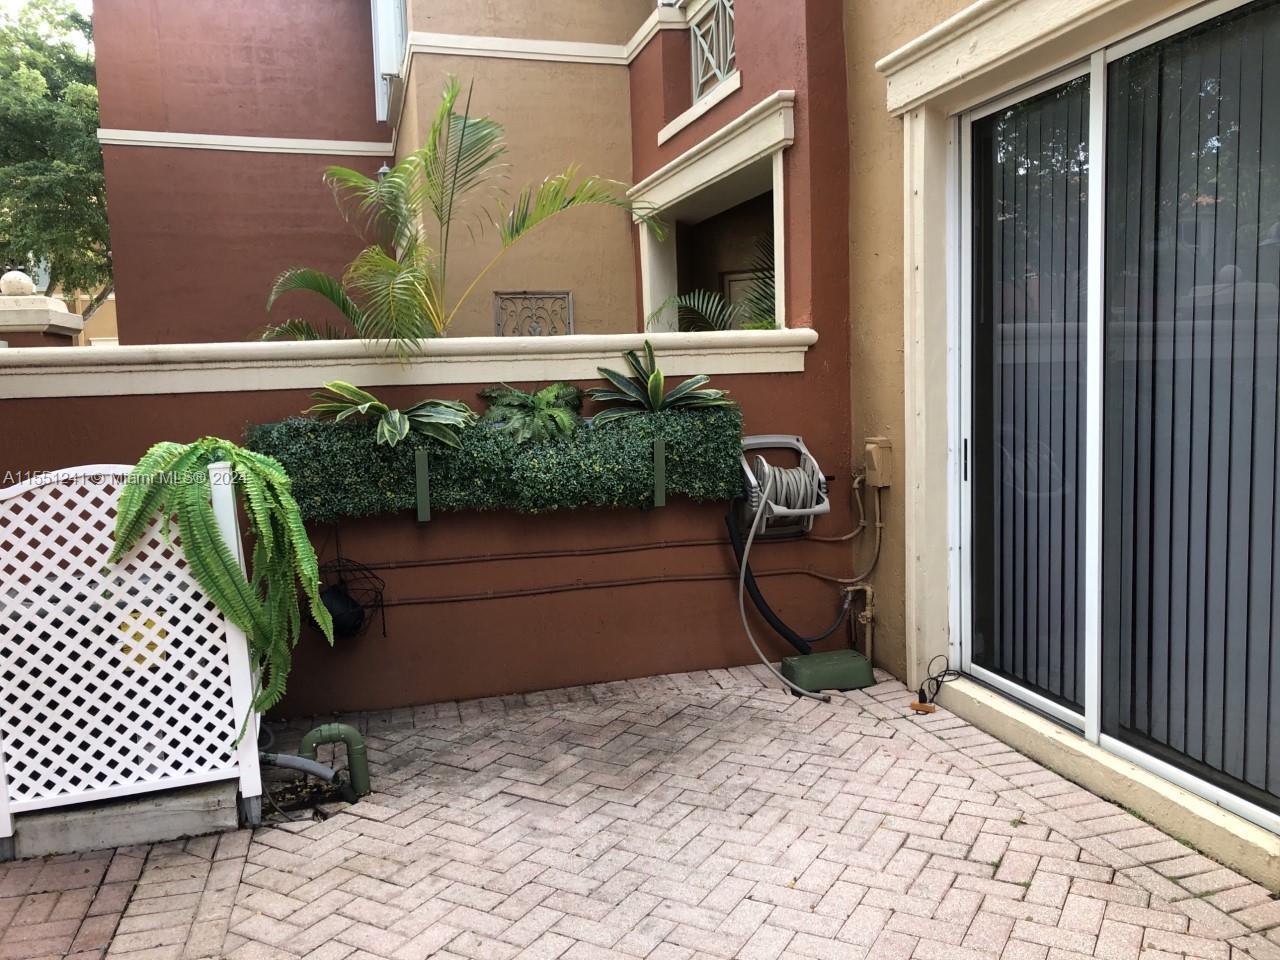 Photo of 6141 NW 115th Pl #357 in Doral, FL